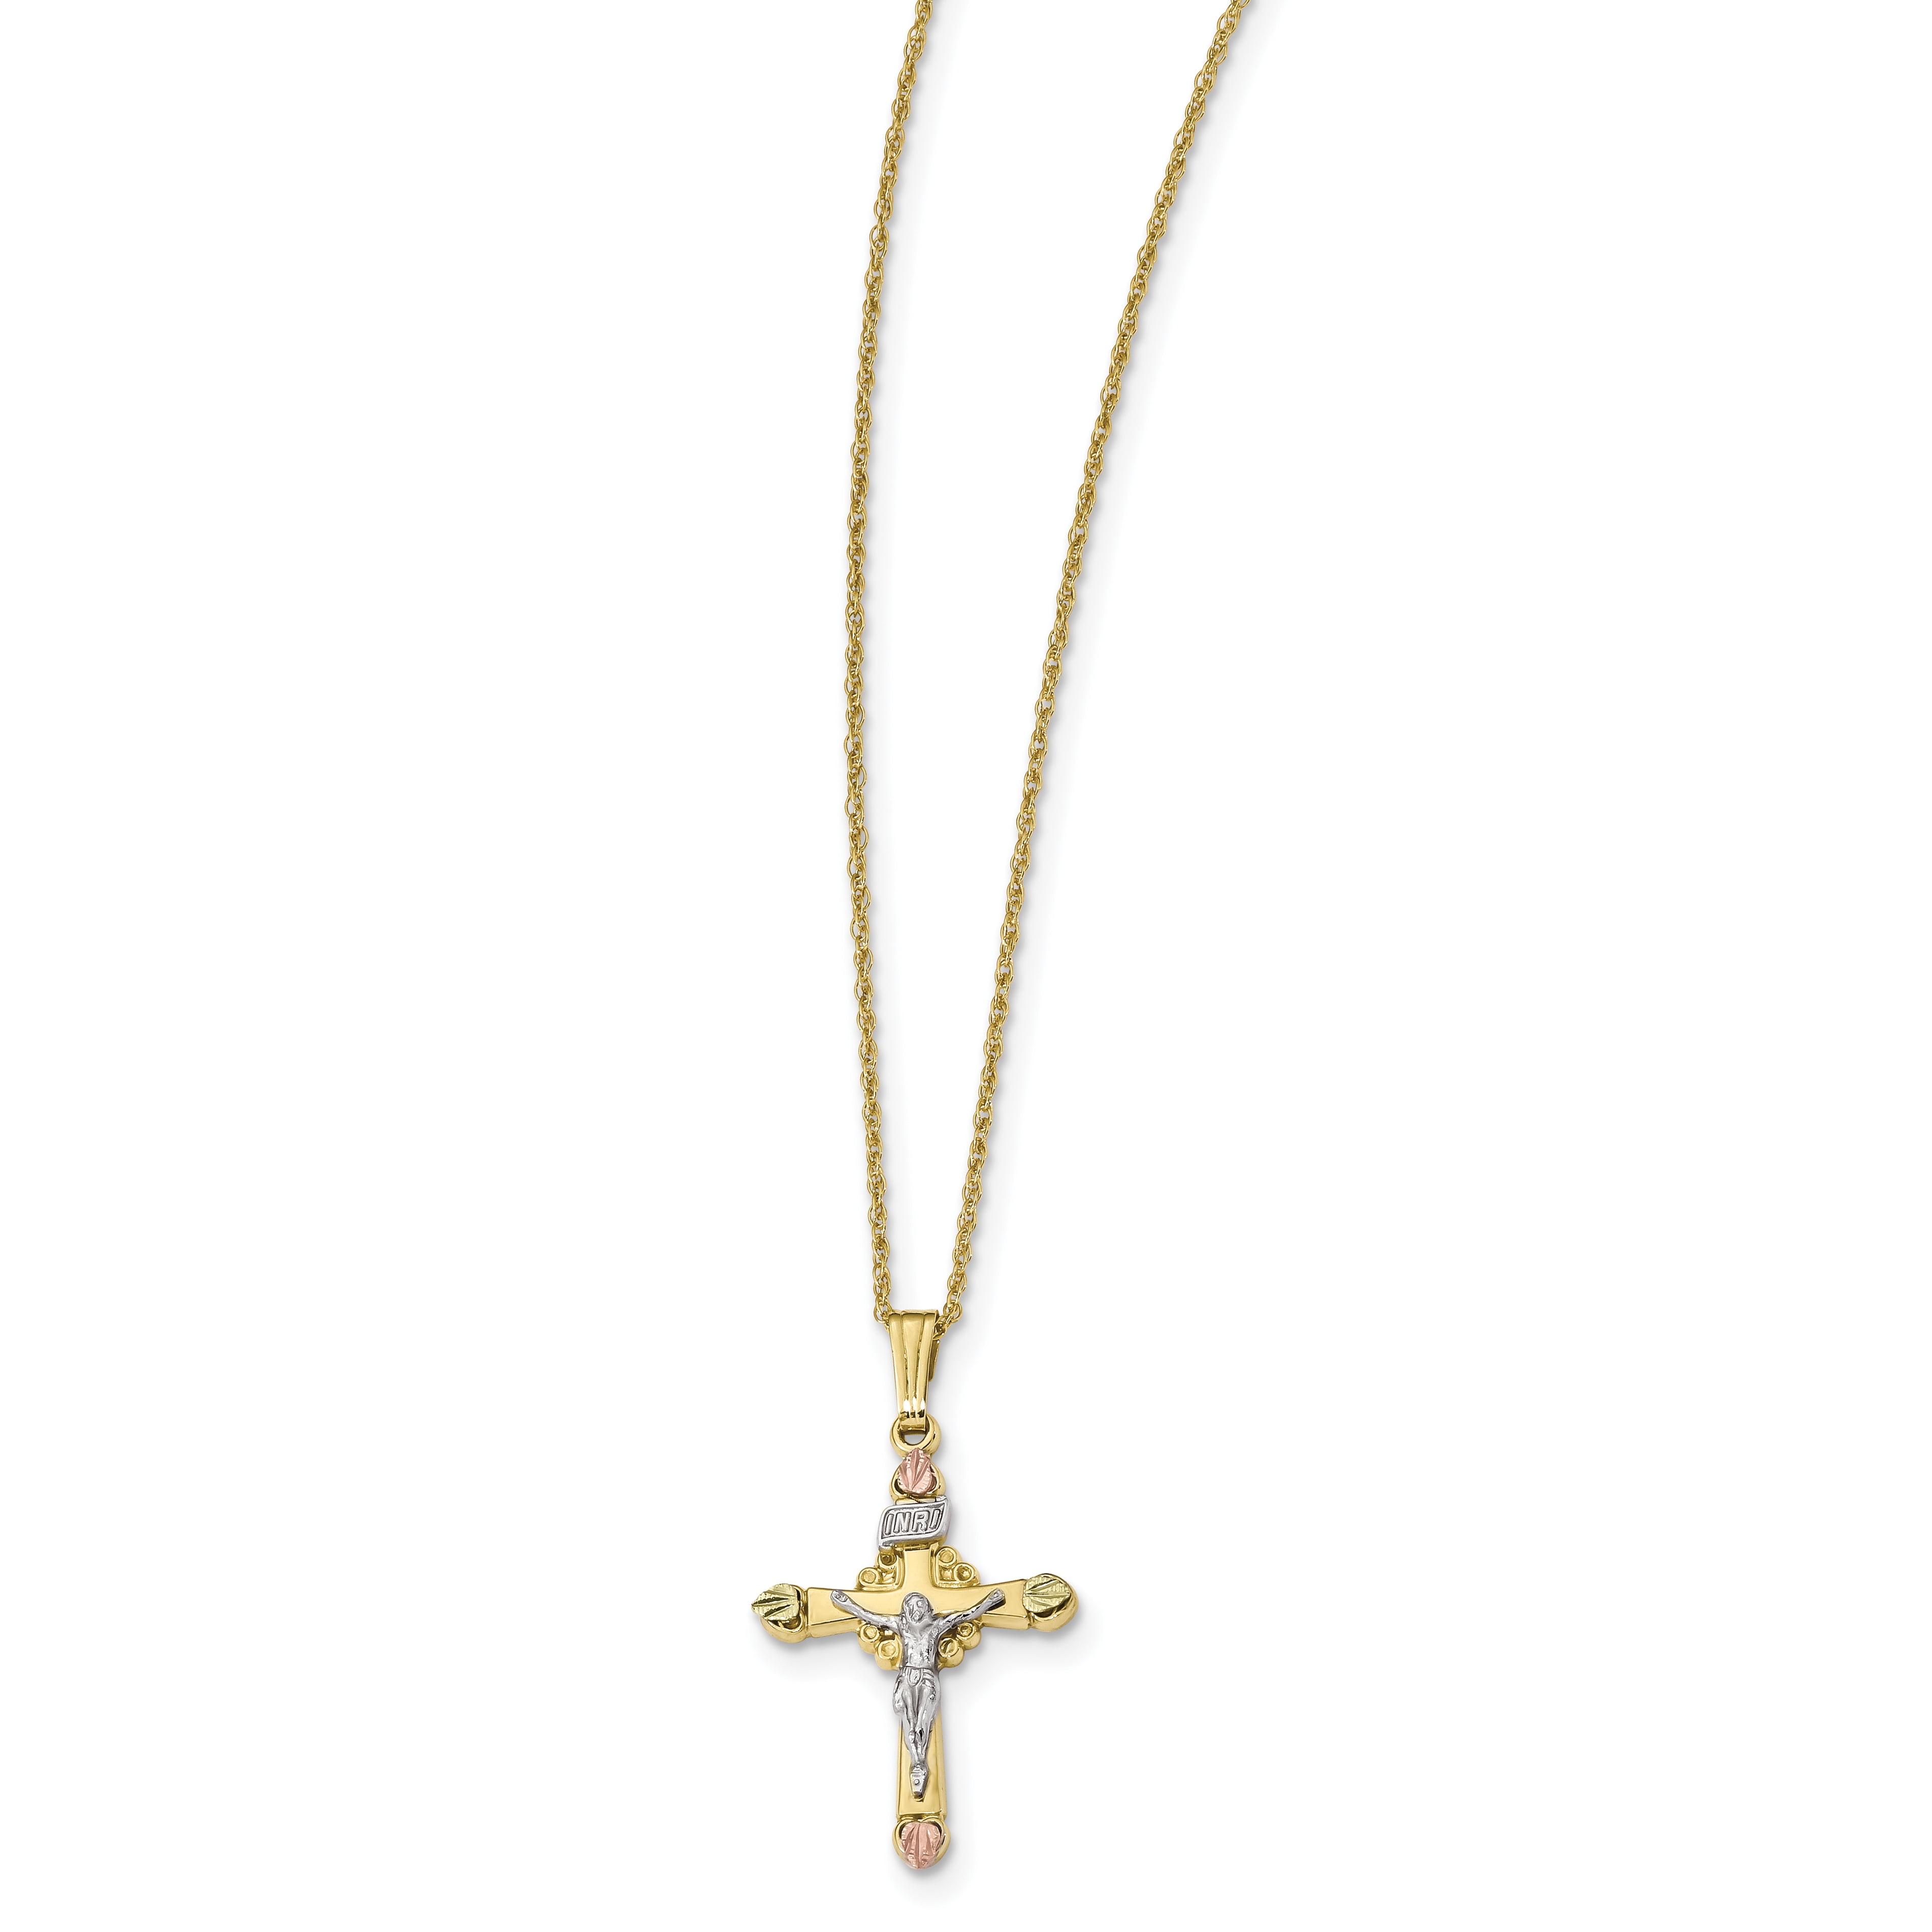 14K Yellow Gold Plated Simulated Diamond Studded Religious Pendant Necklace With Chain Jewelry